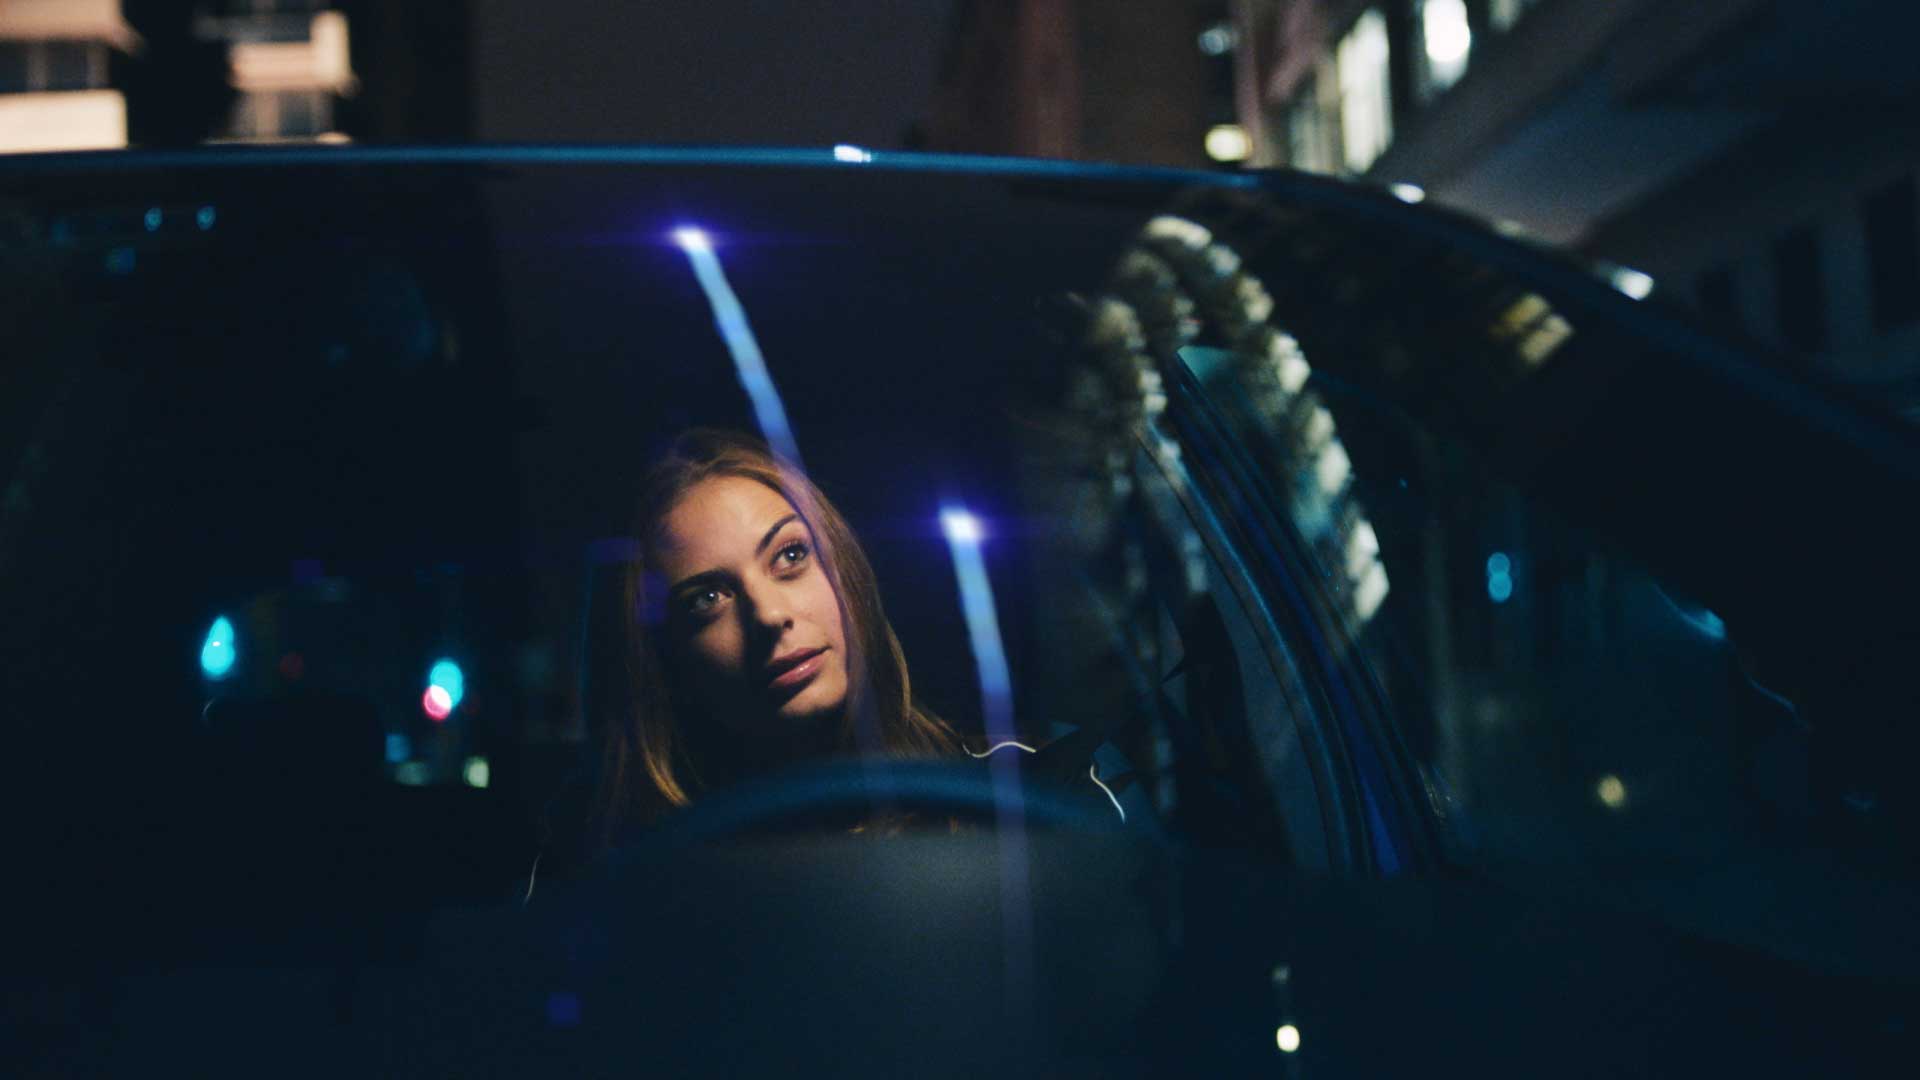 Woman in car. Still from Toyota Yaris commercial.